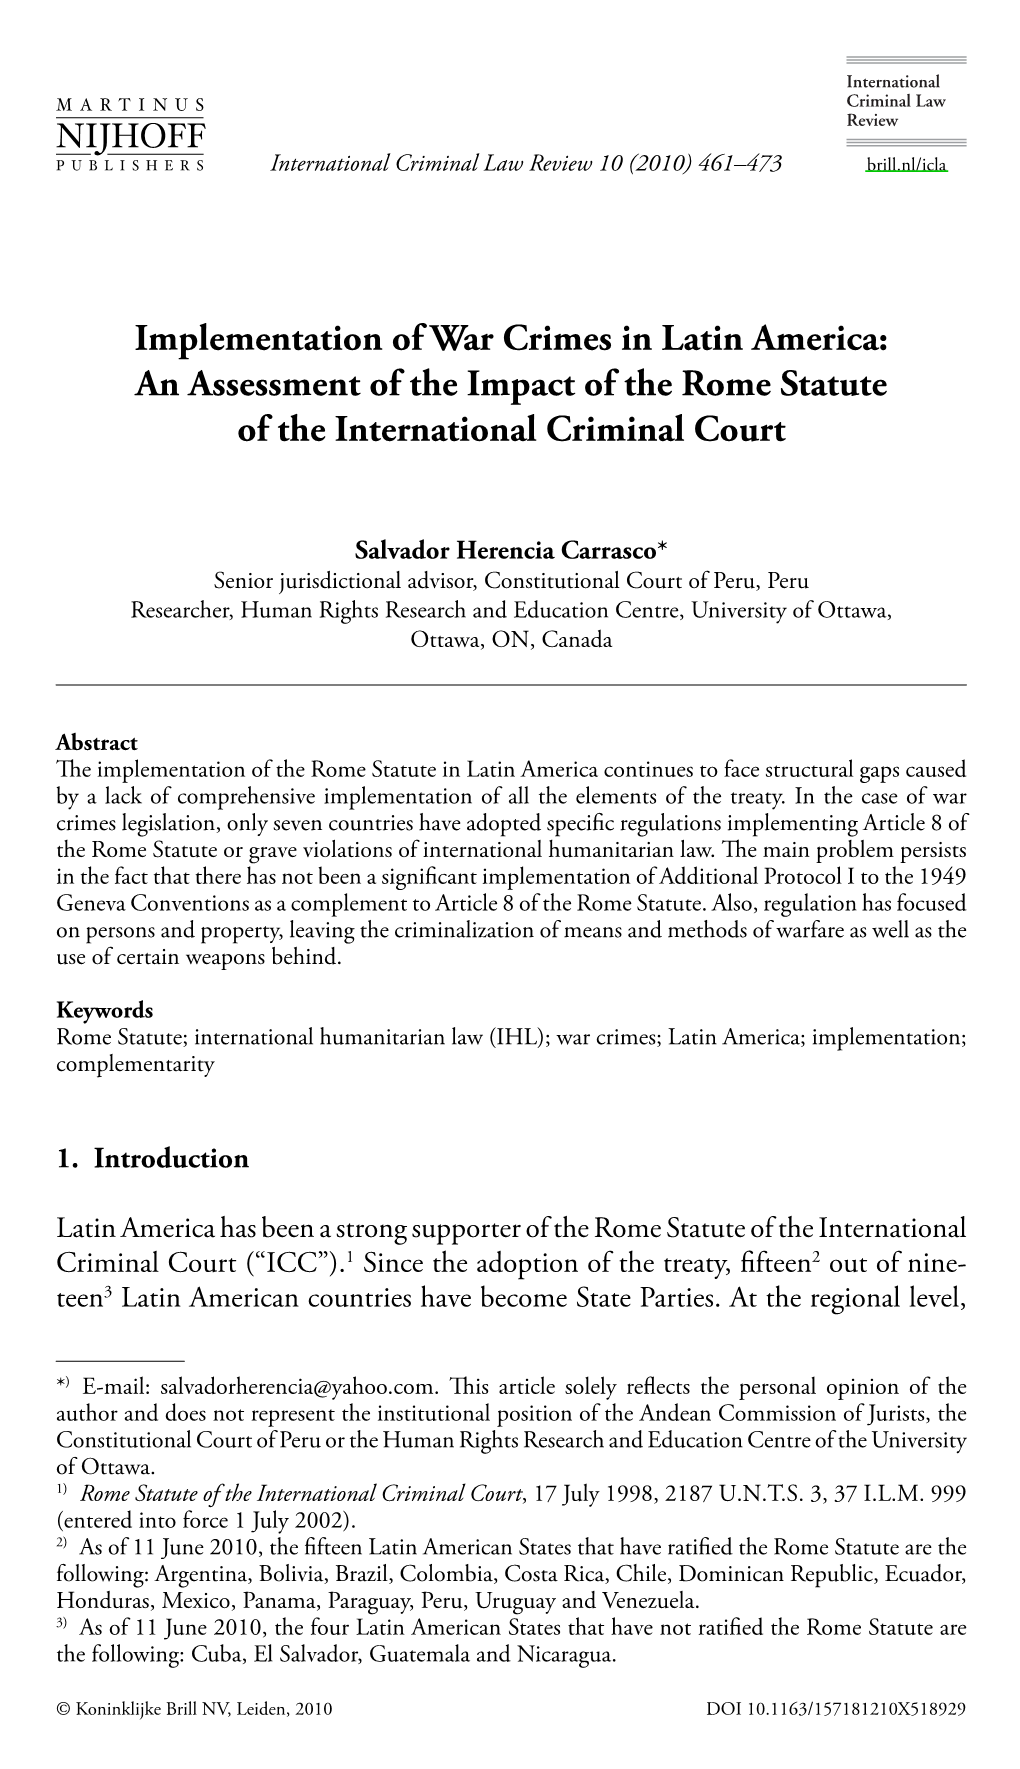 Implementation of War Crimes in Latin America: an Assessment of the Impact of the Rome Statute of the International Criminal Court